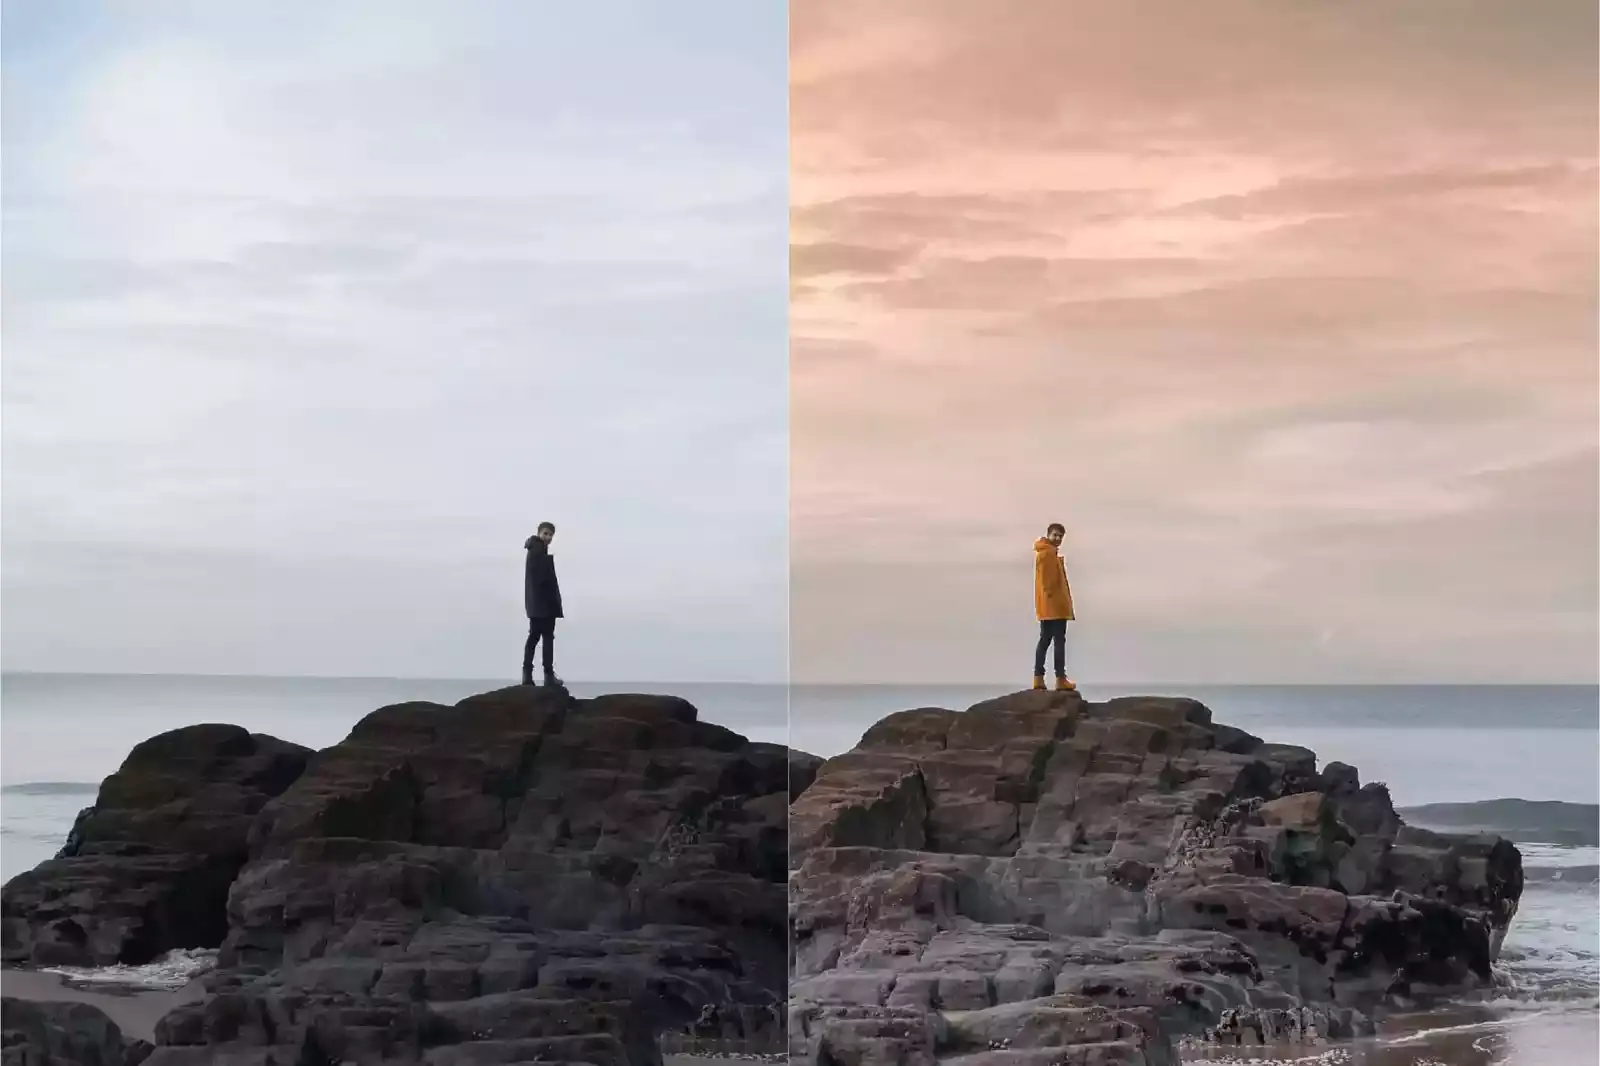 How Can You Colour Grade Your Images?